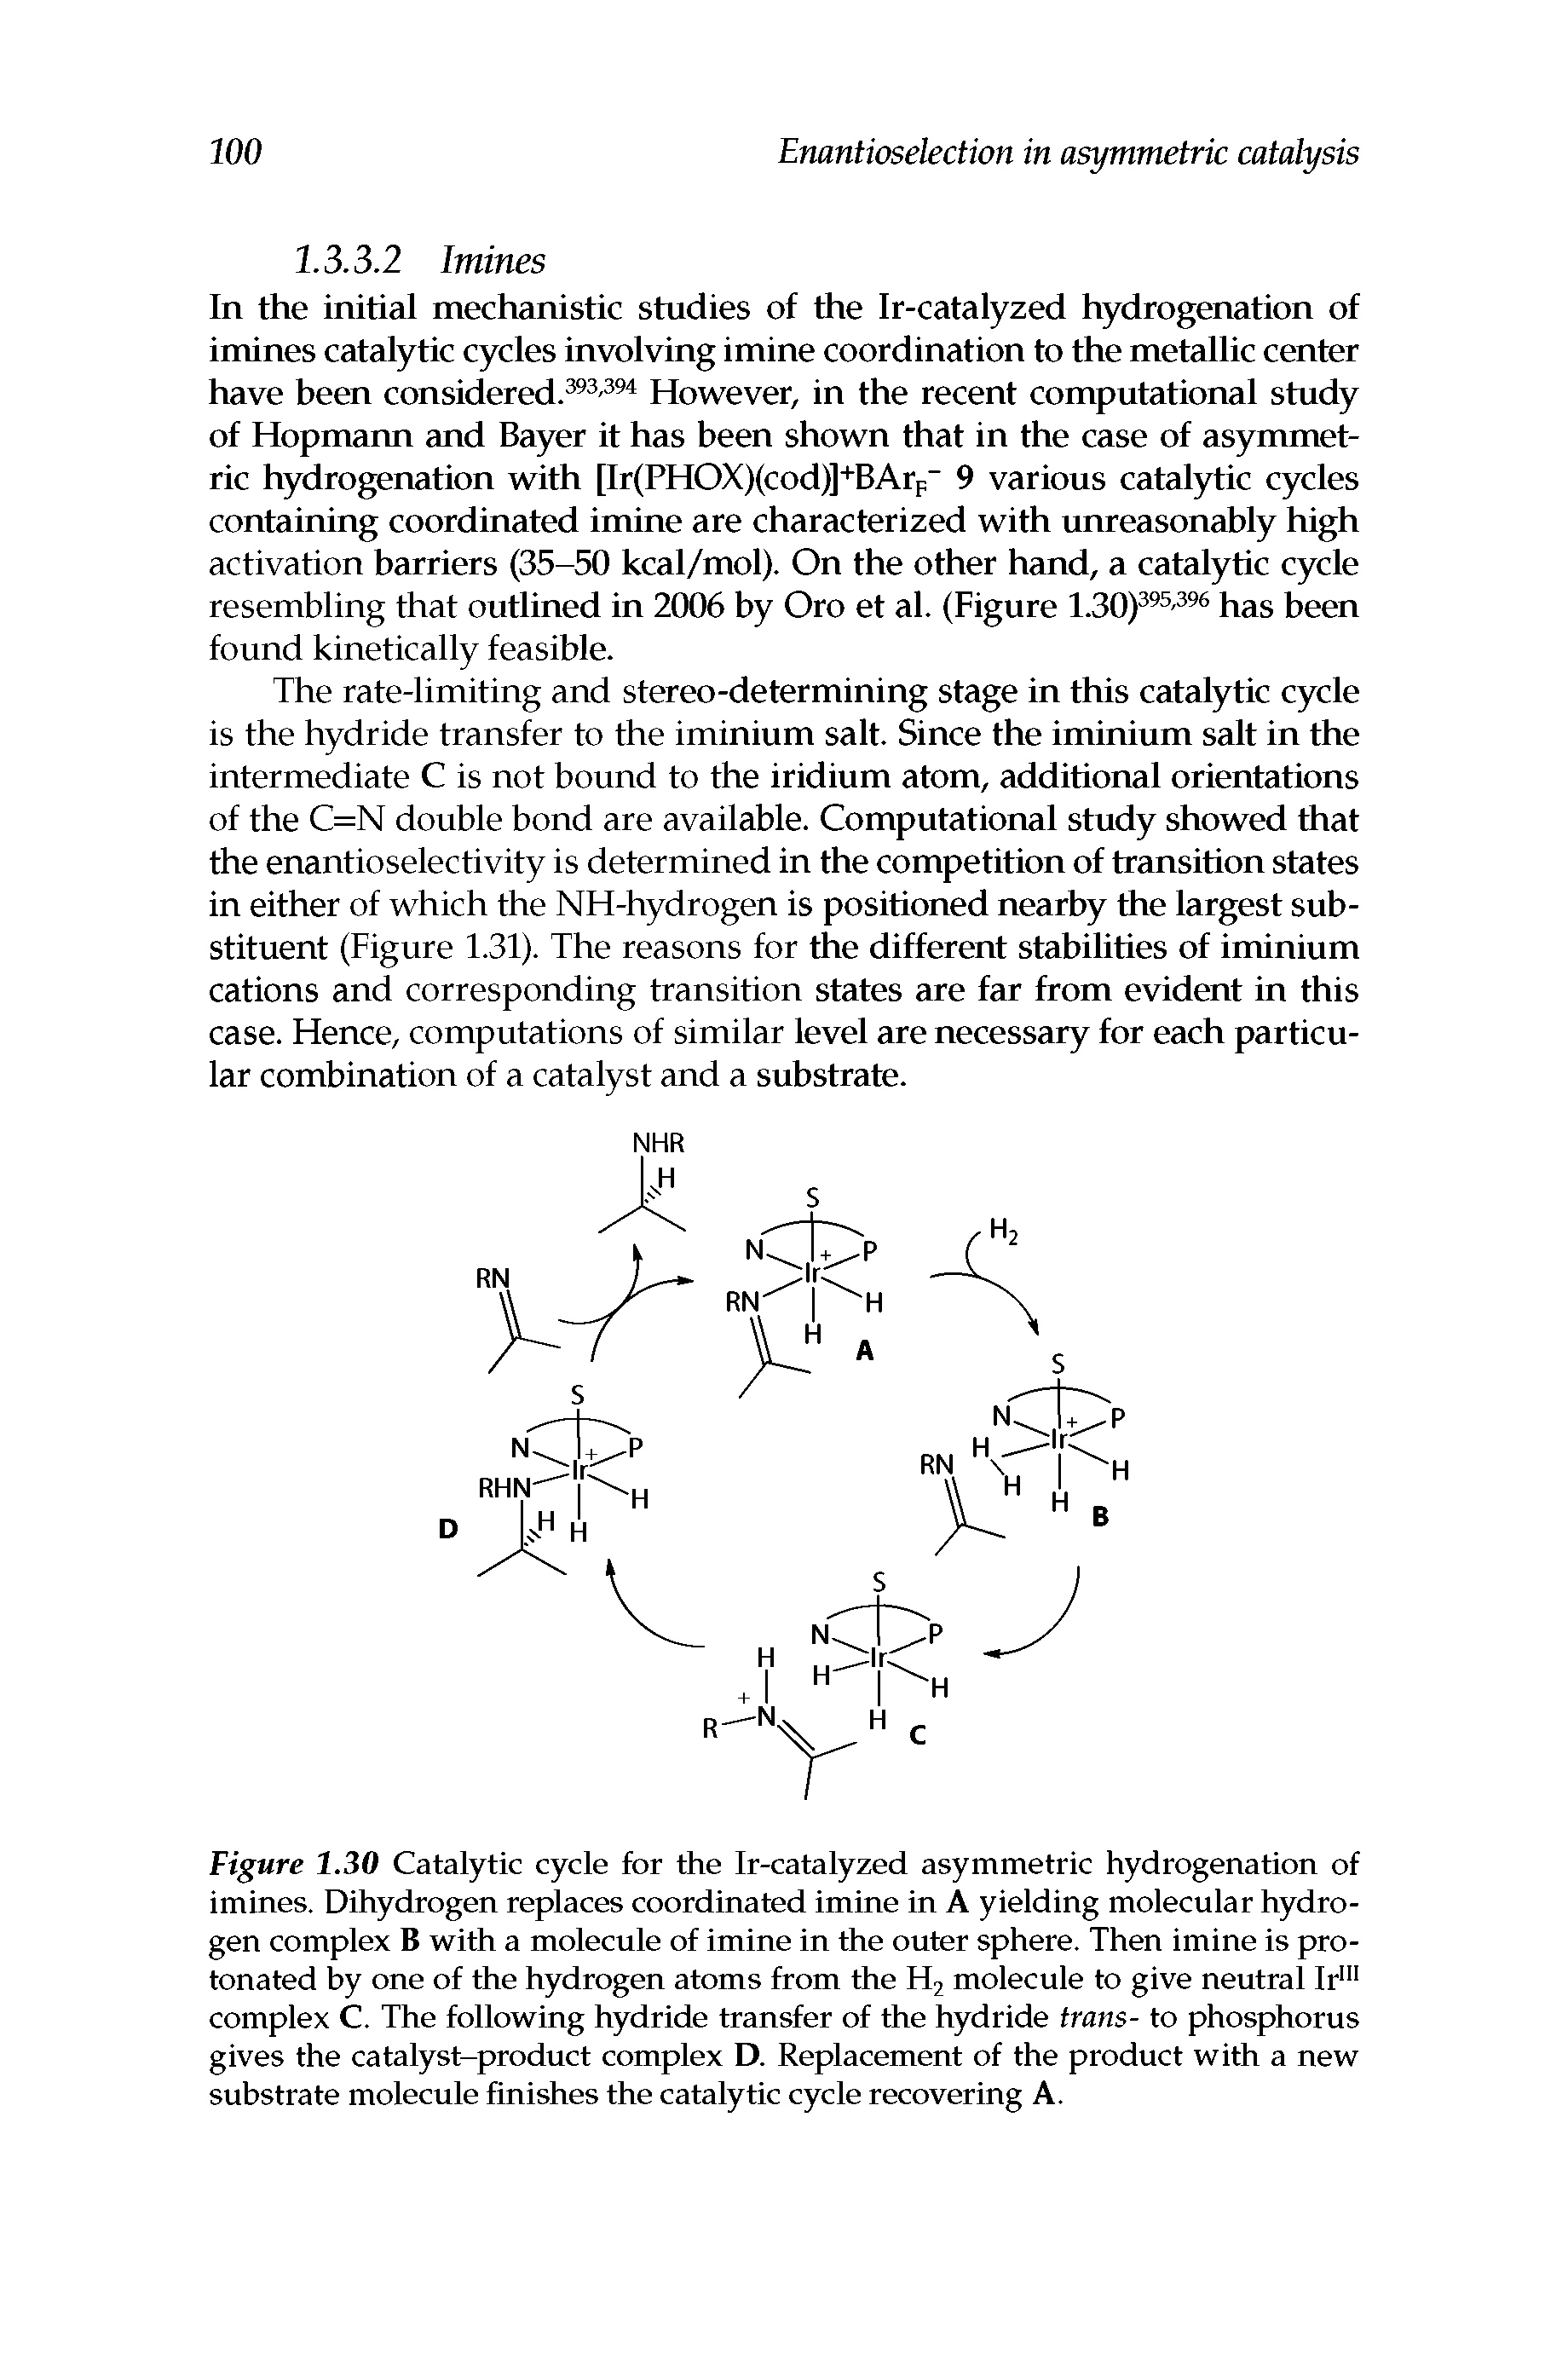 Figure 1.30 Catalytic cycle for the Ir-catalyzed asymmetric hydrogenation of imines. Dihydrogen replaces coordinated imine in A yielding molecular hydrogen complex B with a molecule of imine in the outer sphere. Then imine is pro-tonated by one of the hydrogen atoms from the H2 molecule to give neutral Ir complex C. The following hydride transfer of the hydride trans- to phosphorus gives the catalyst-product complex D. Replacement of the product with a new substrate molecule finishes the catalytic cycle recovering A.